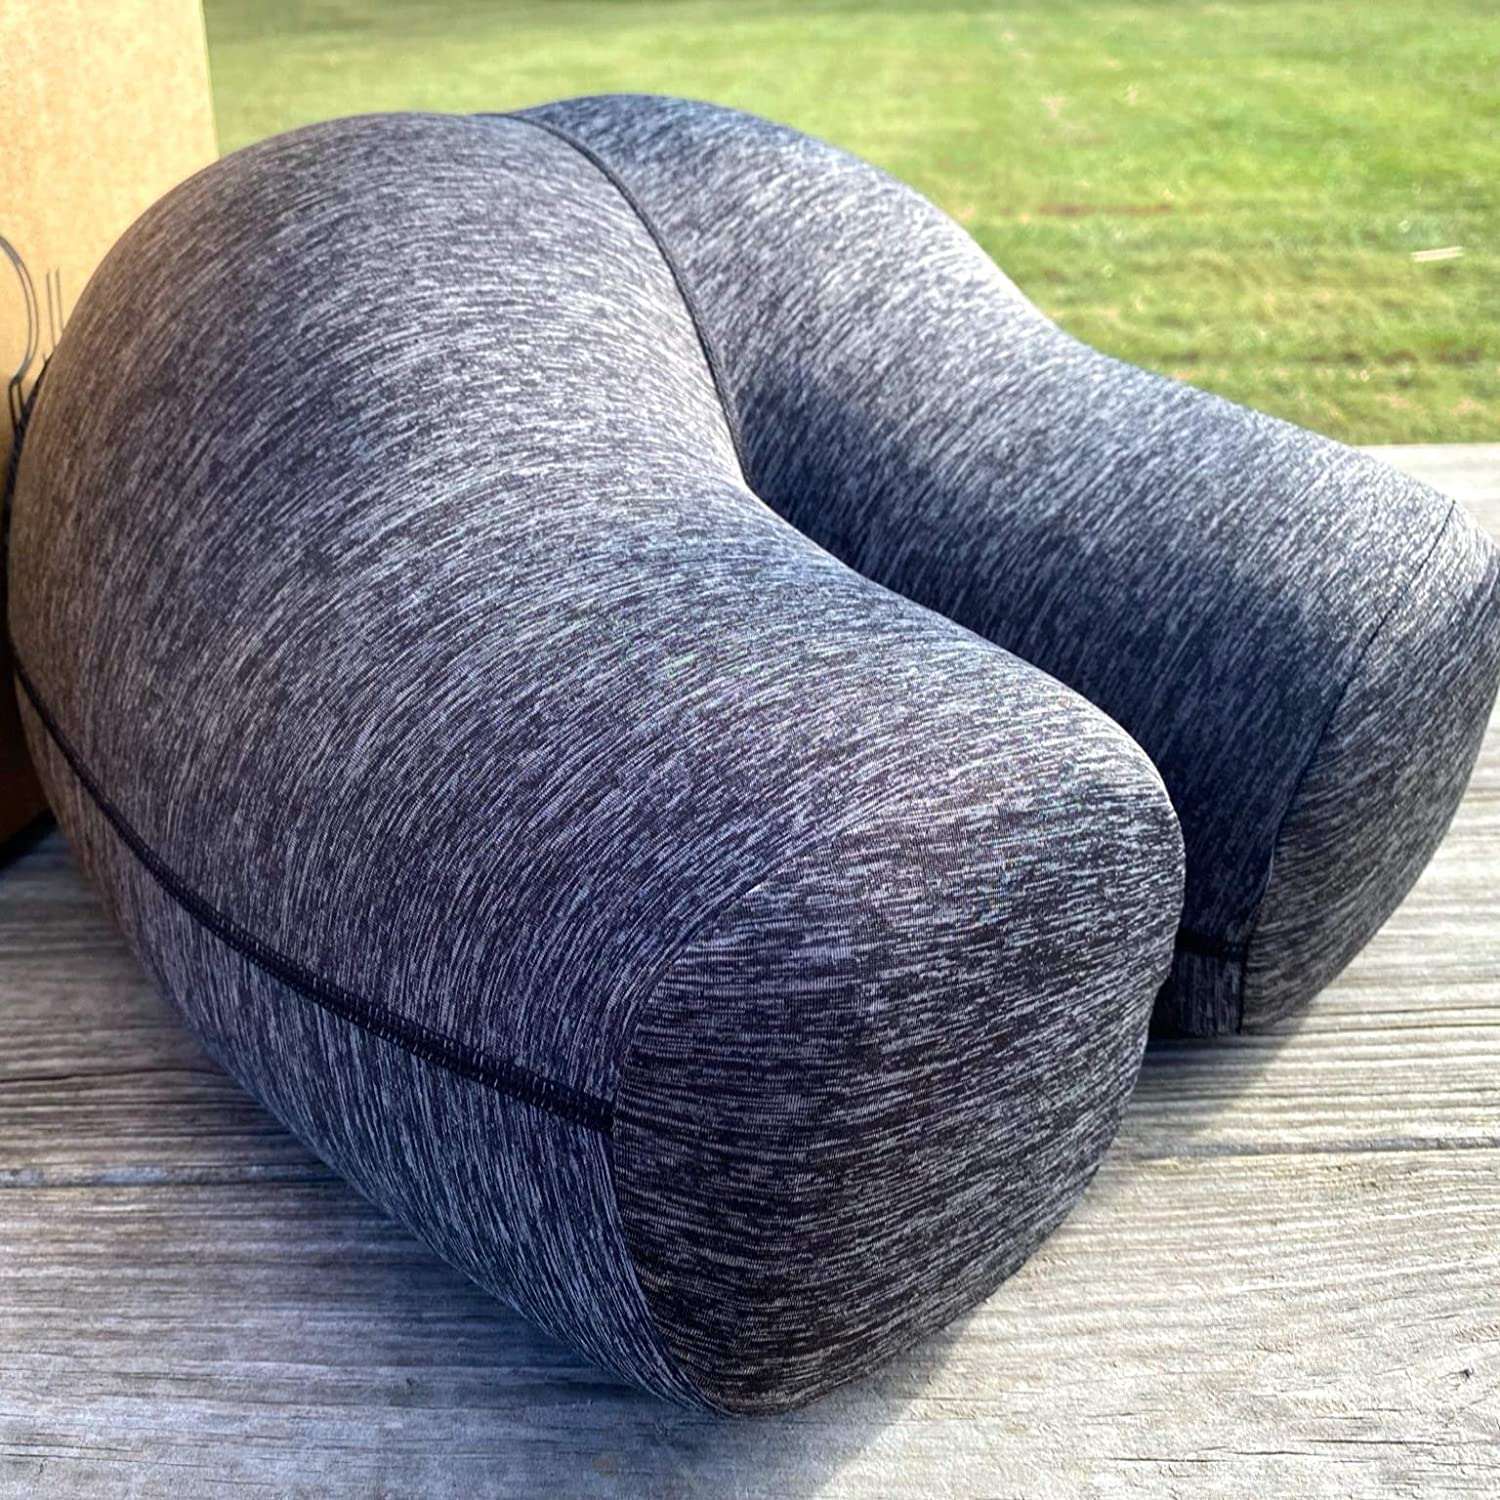 butt pillow, The World's Most Bootyful Pillow for All Kinds of  Sleepers-Charcoal